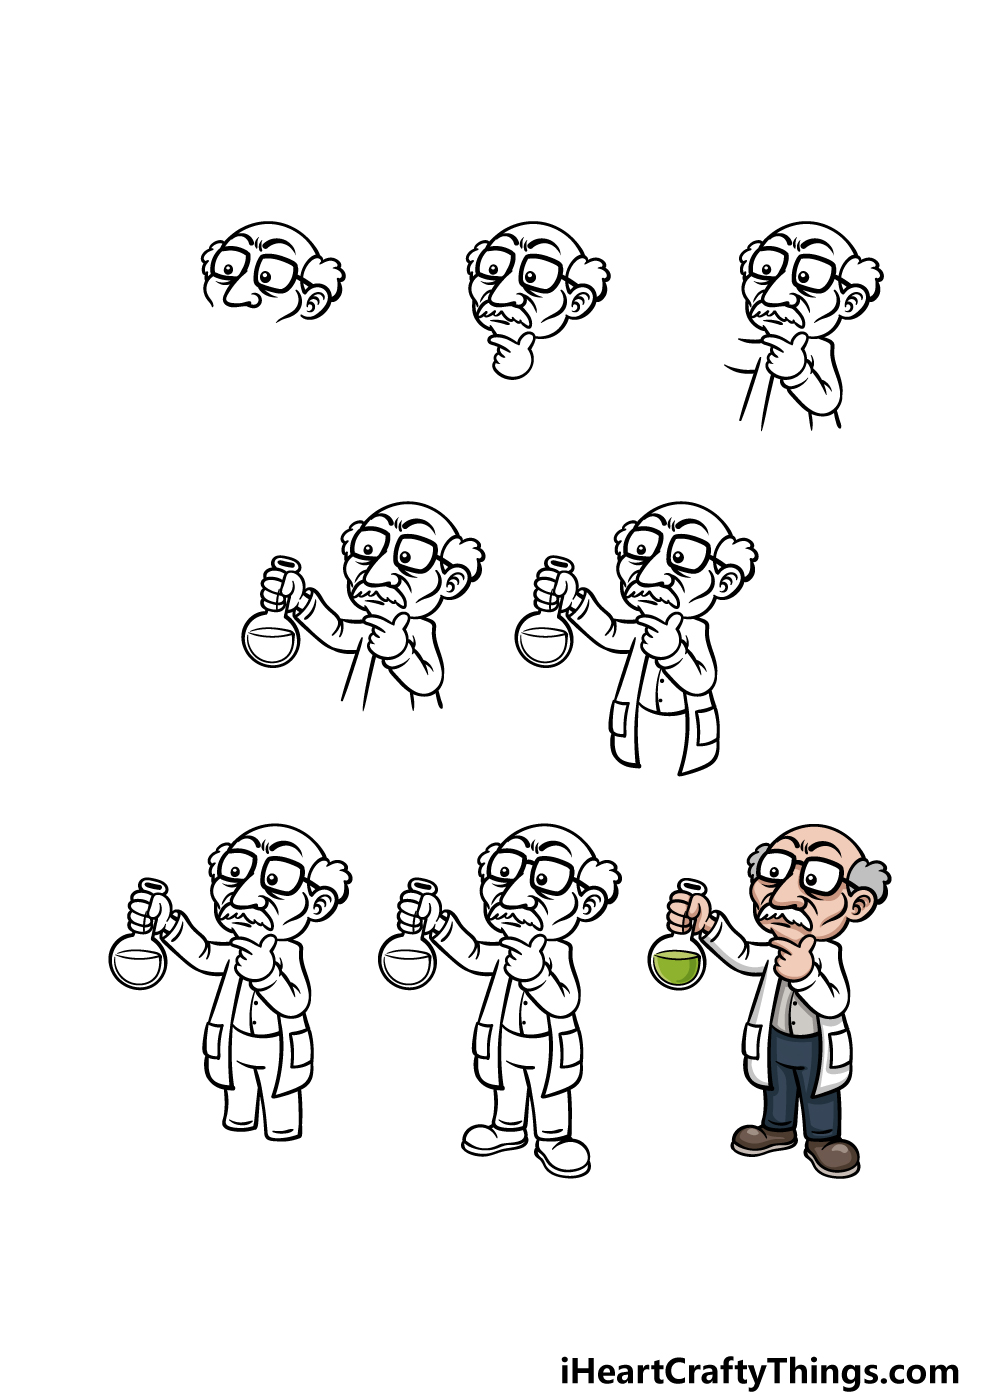 Cartoon Scientist Drawing - How To Draw A Cartoon Scientist Step By Step